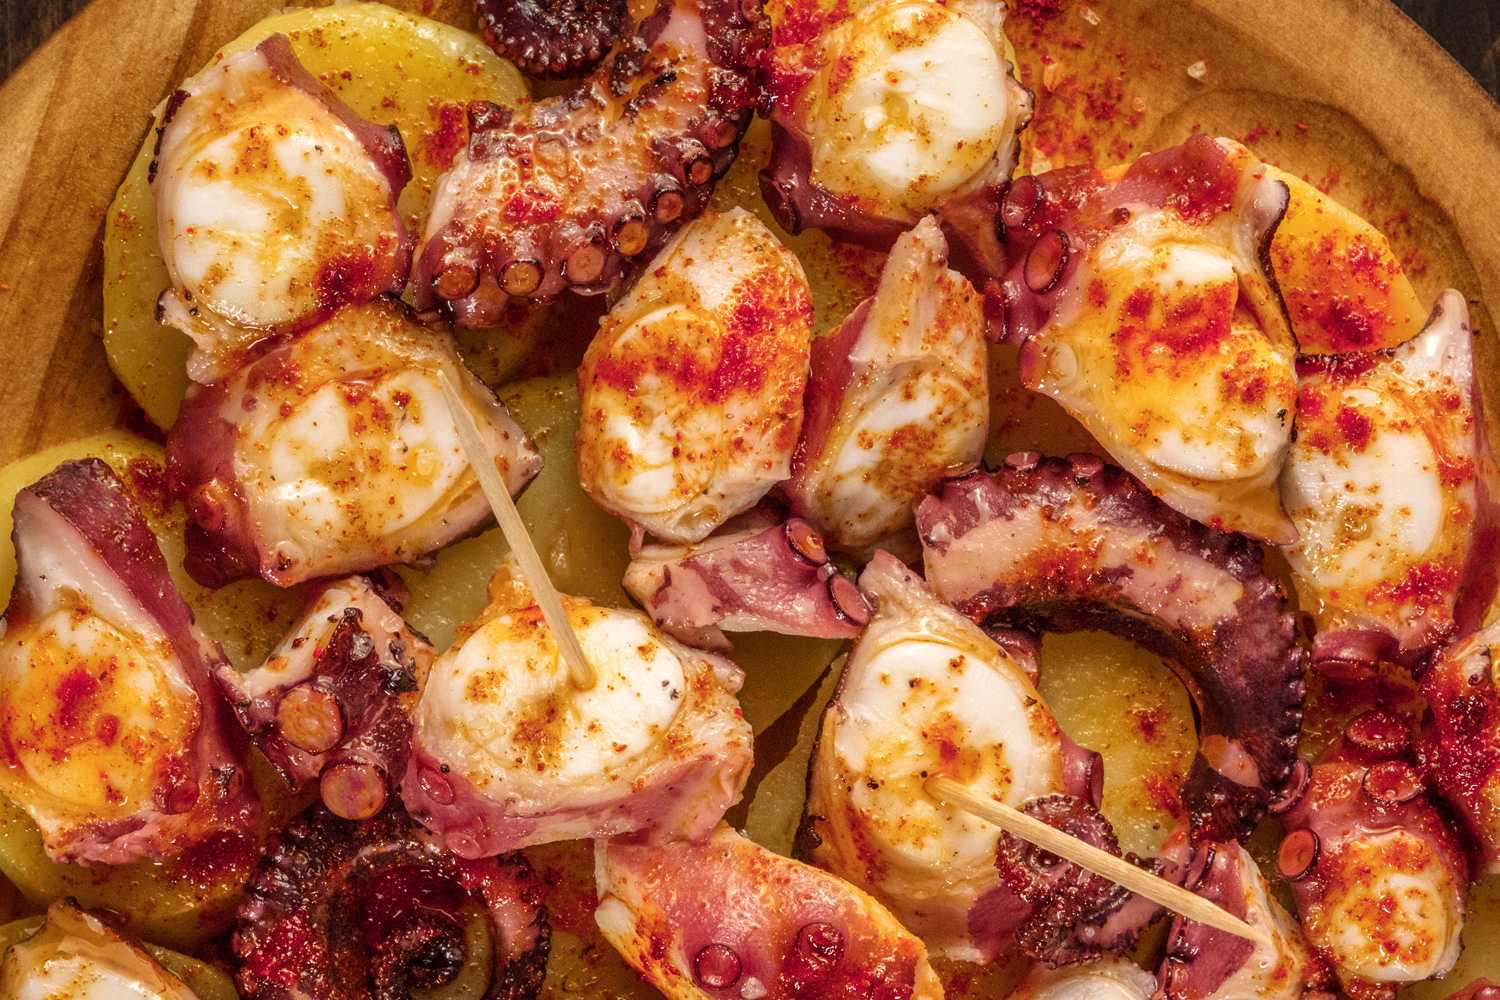 Roasted octopus pieces topped with paprika with toothpicks